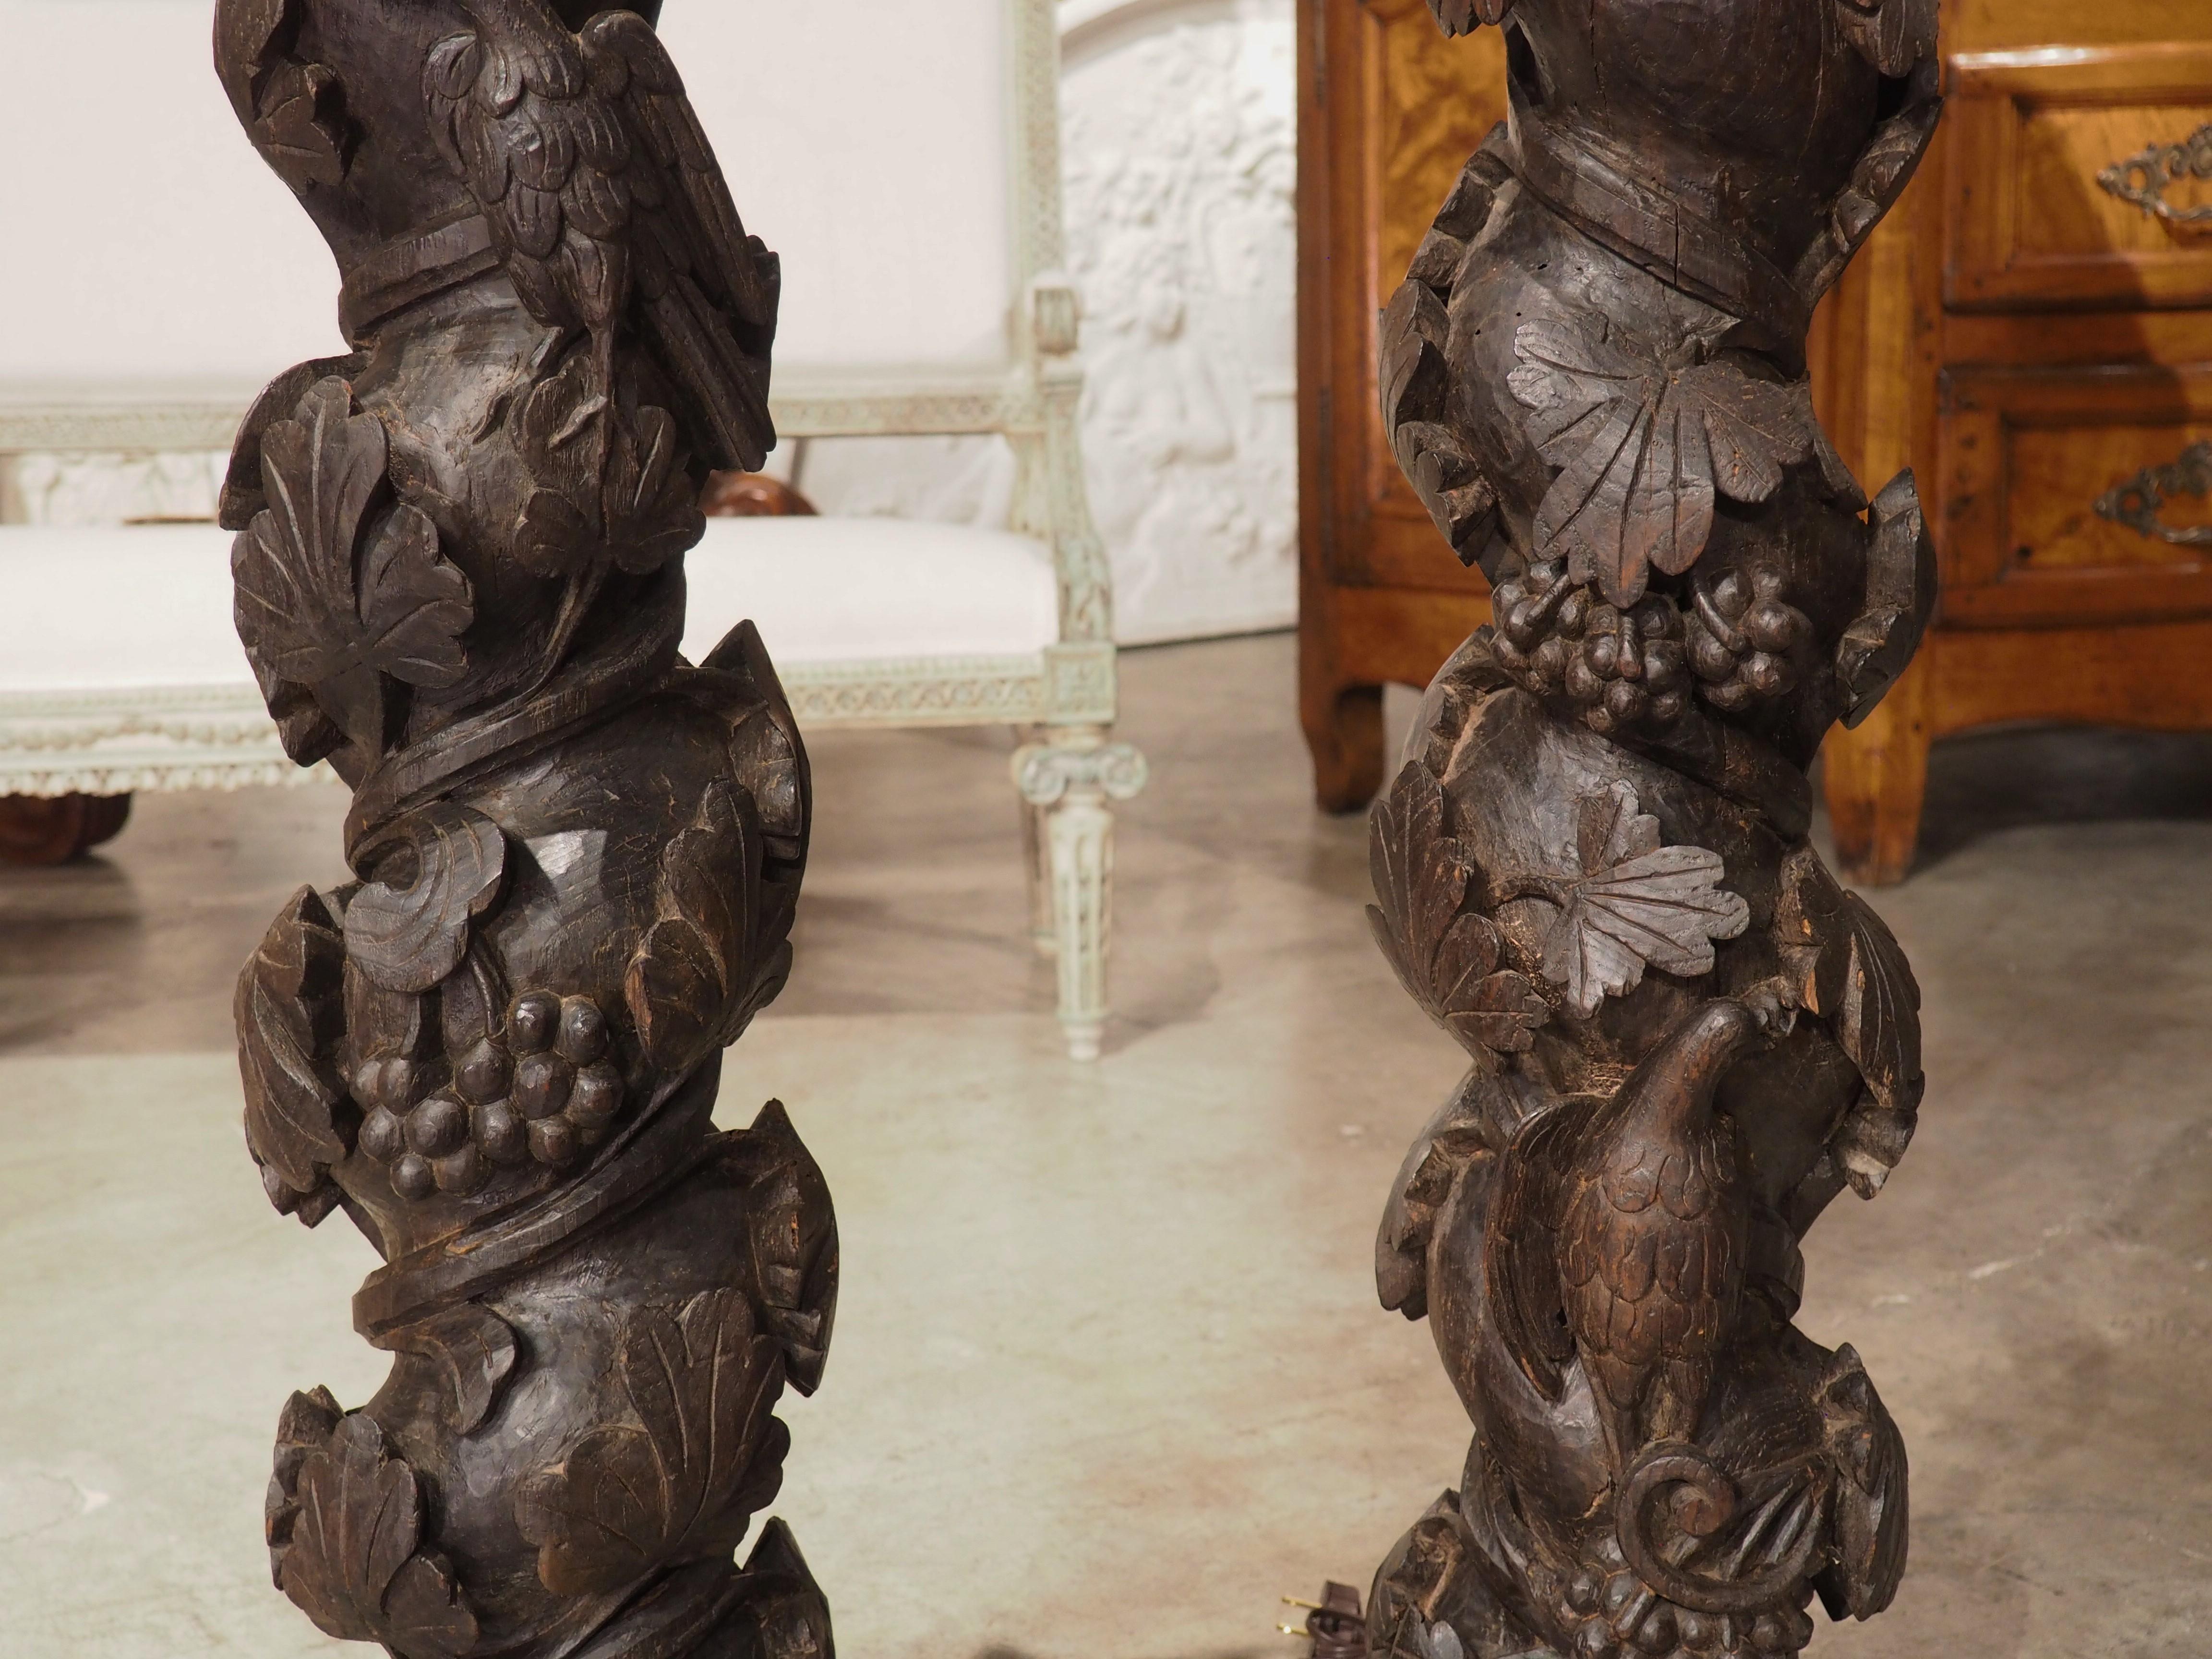 Originally a pair of architecturals, these Solomonic columns have been repurposed into a unique set of lamps. Hand-carved in chestnut wood in Portugal during the 1700’s, the helix-shaped columns are vibrant interpretations of original 2nd century CE